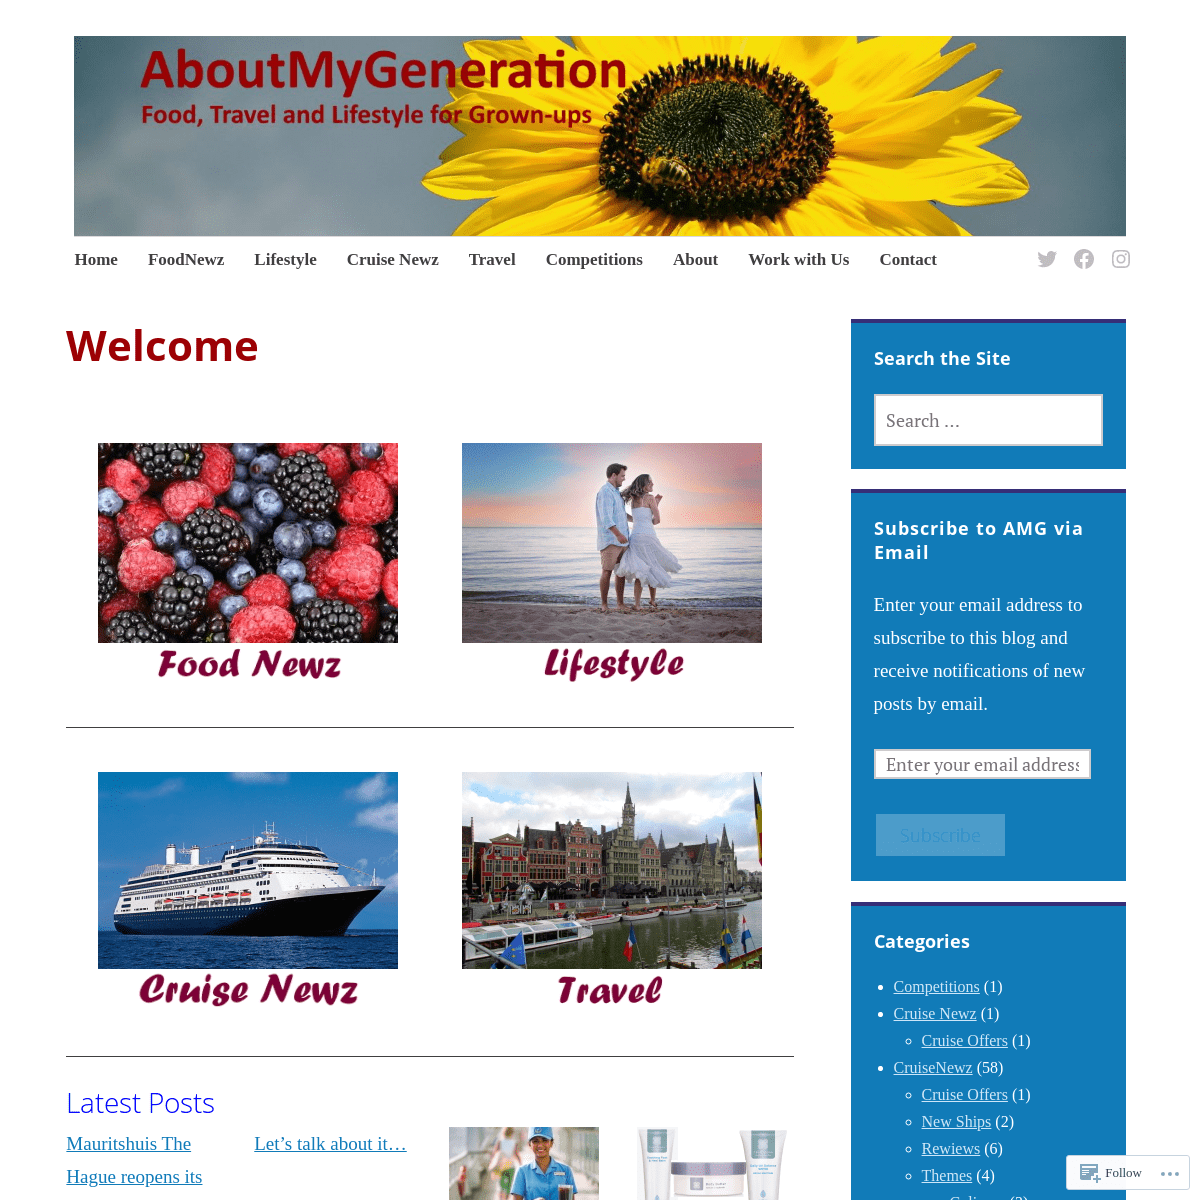 A complete backup of https://aboutmygeneration.com